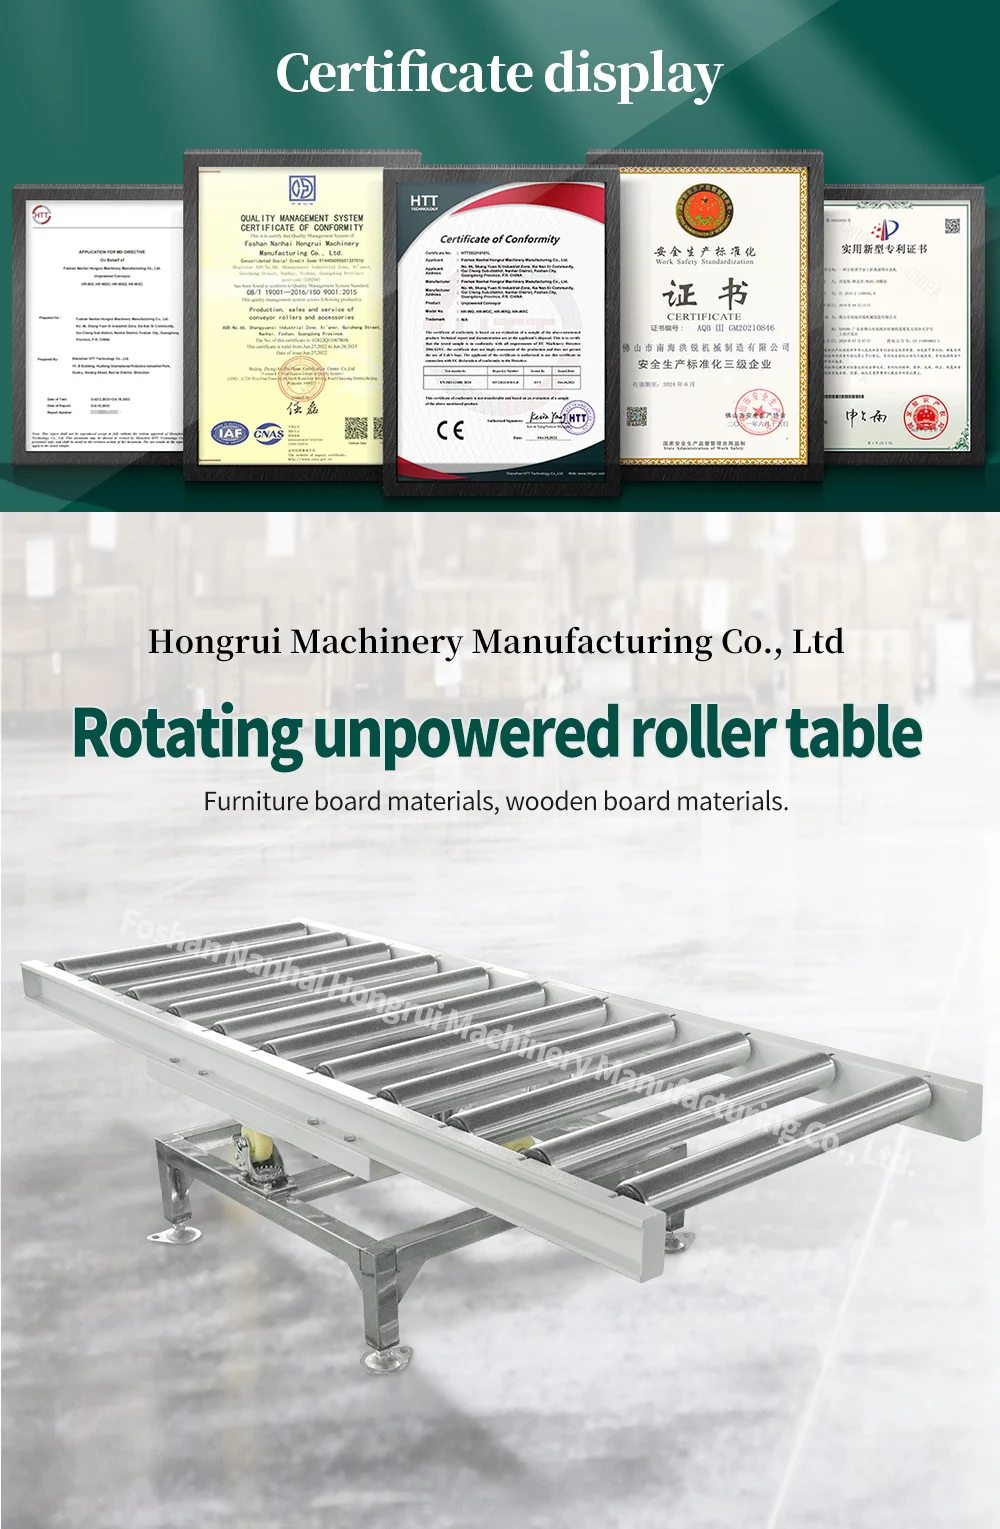 Simple operation and manual rotation of the roller table, lightweight design for flexible rotation factory